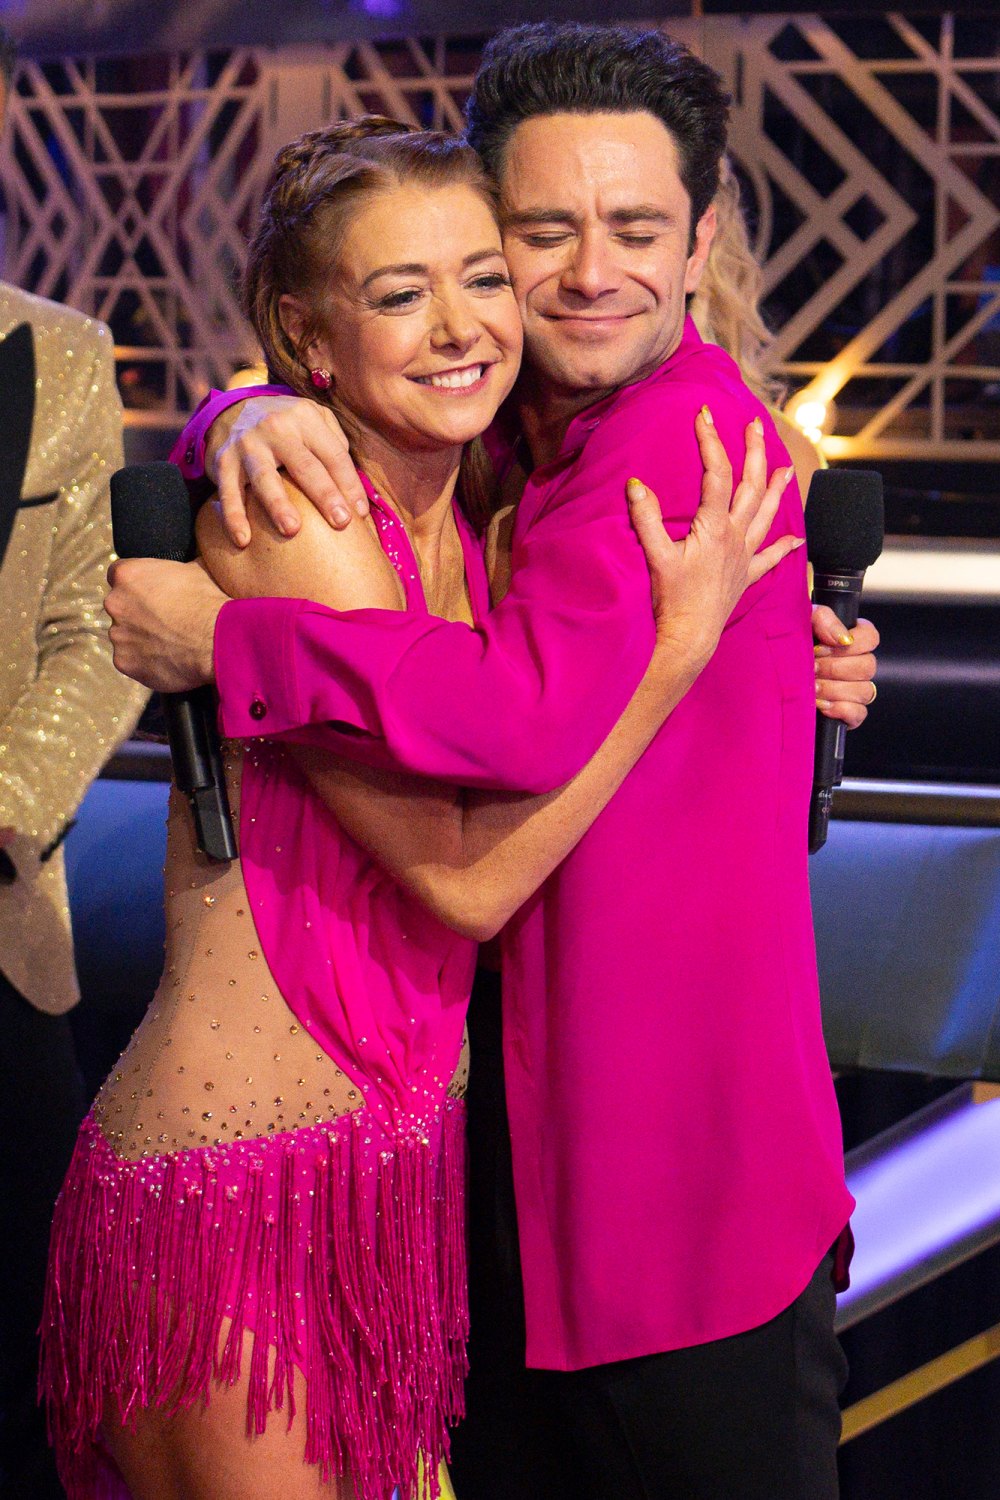 Alyson Hannigan Reveals DWTS Weight Loss, Says She ‘Shed’ Her ‘Insecurities’